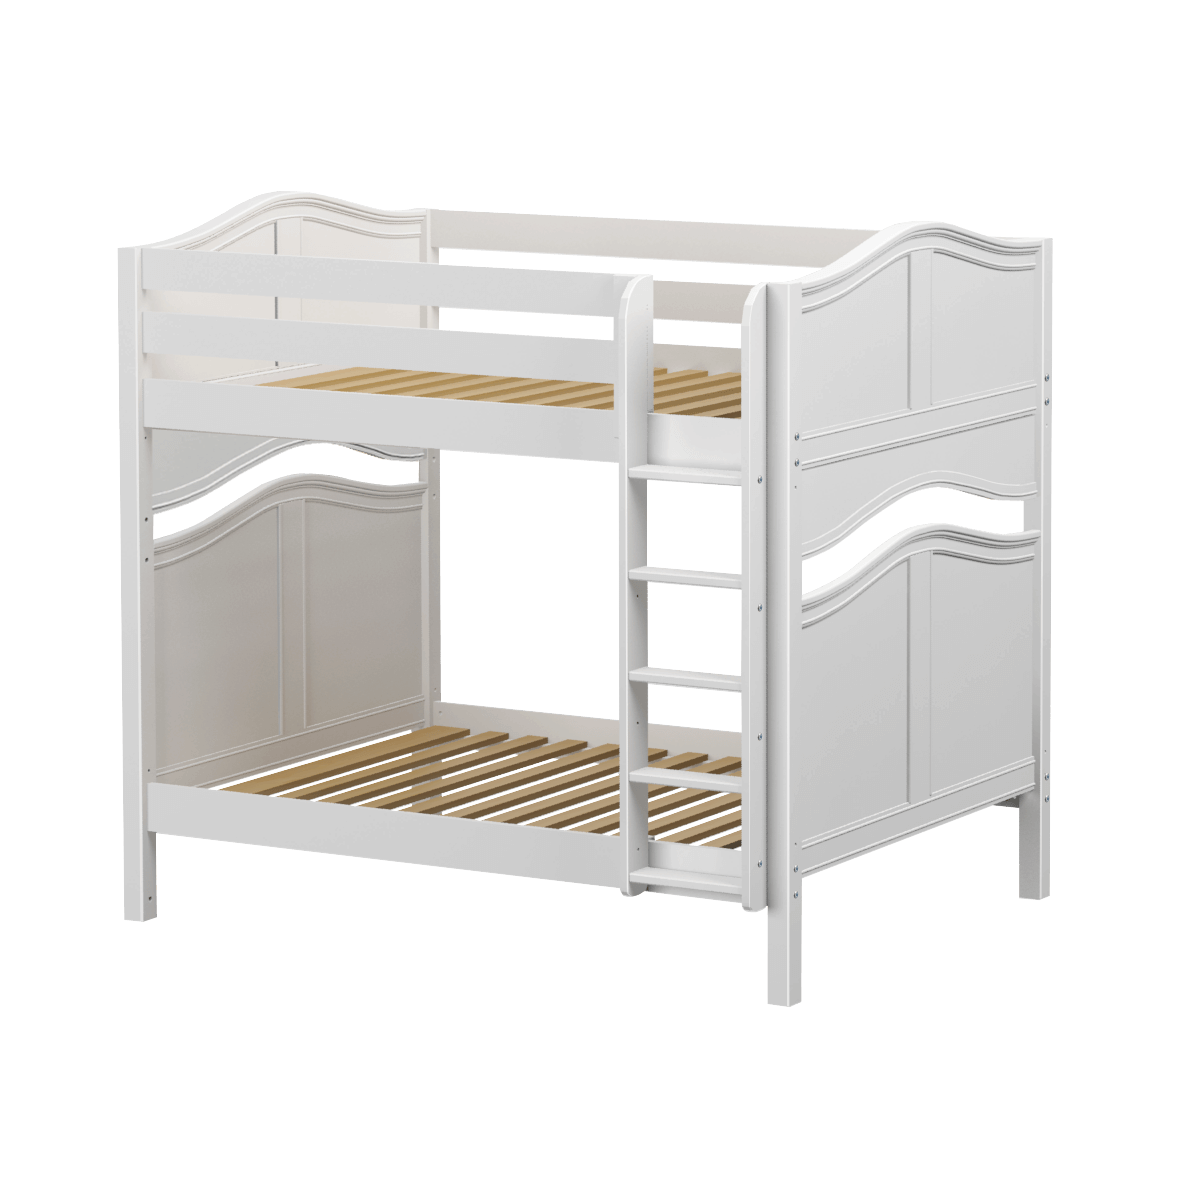 Curved style bunk bed with straight ladder, shown in white